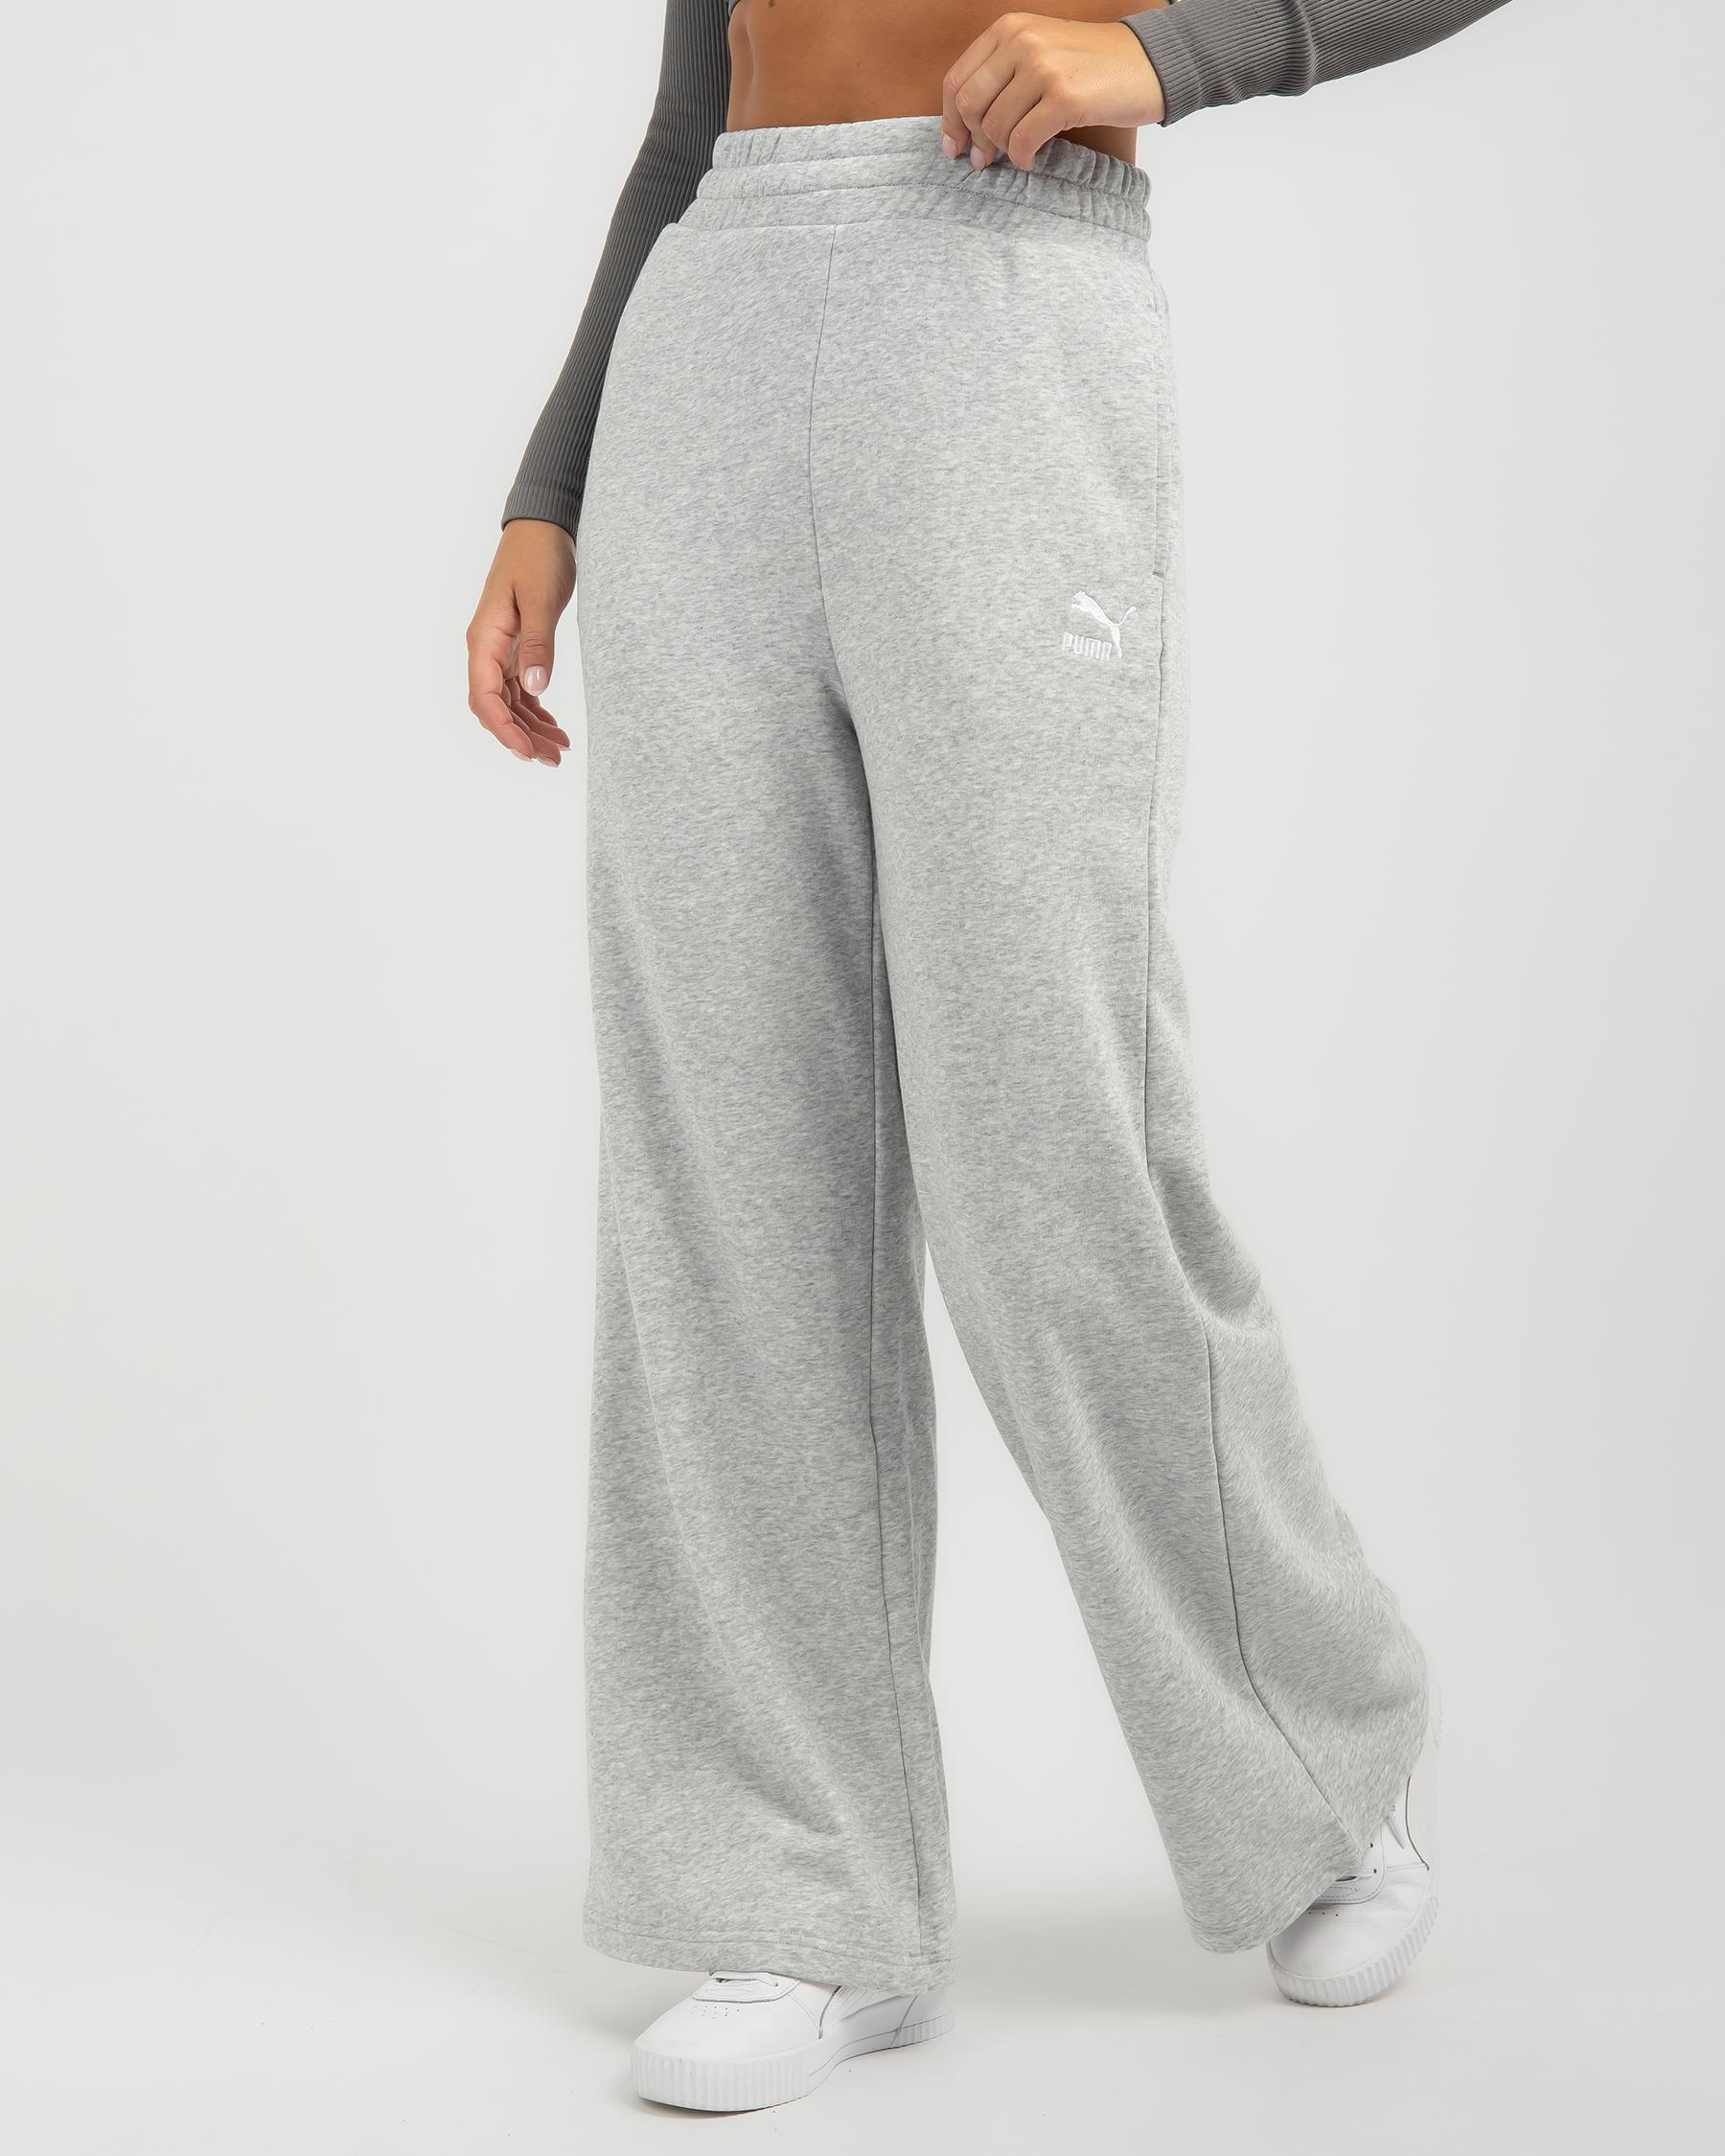 Puma Relaxed Track Pants In Light Gray Heather - Fast Shipping & Easy ...